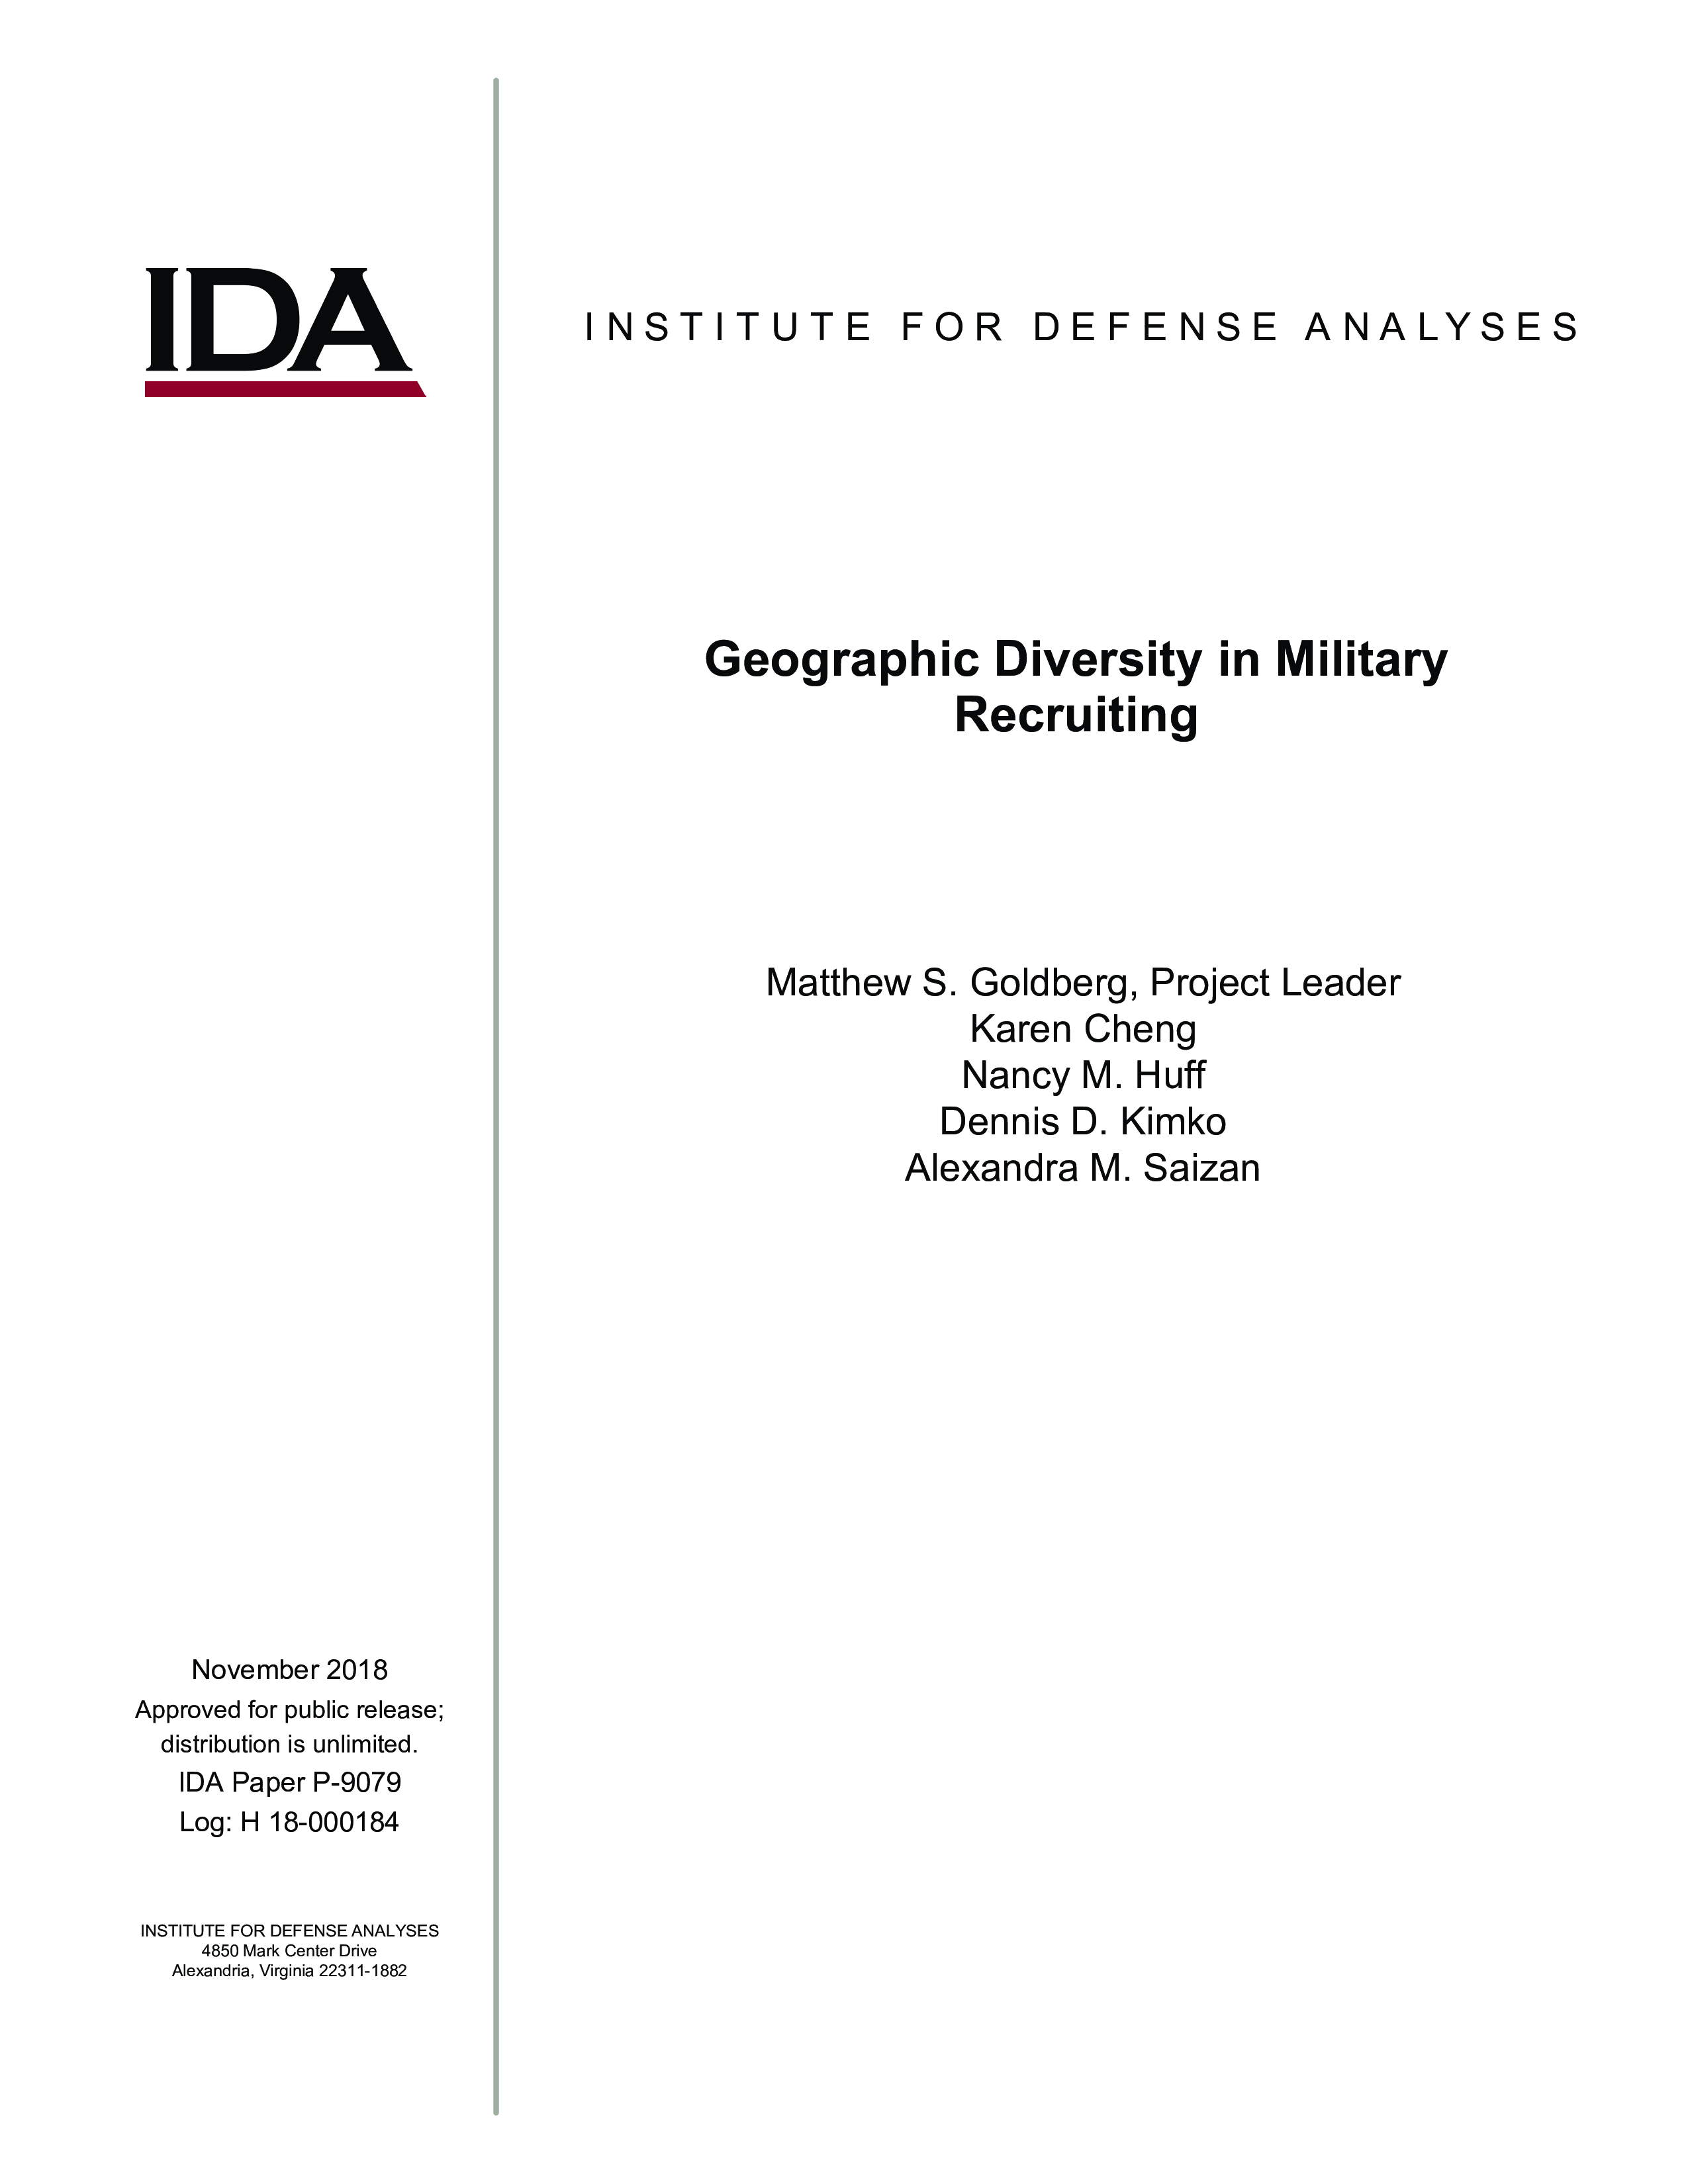 Geographic Diversity in Military Recruiting